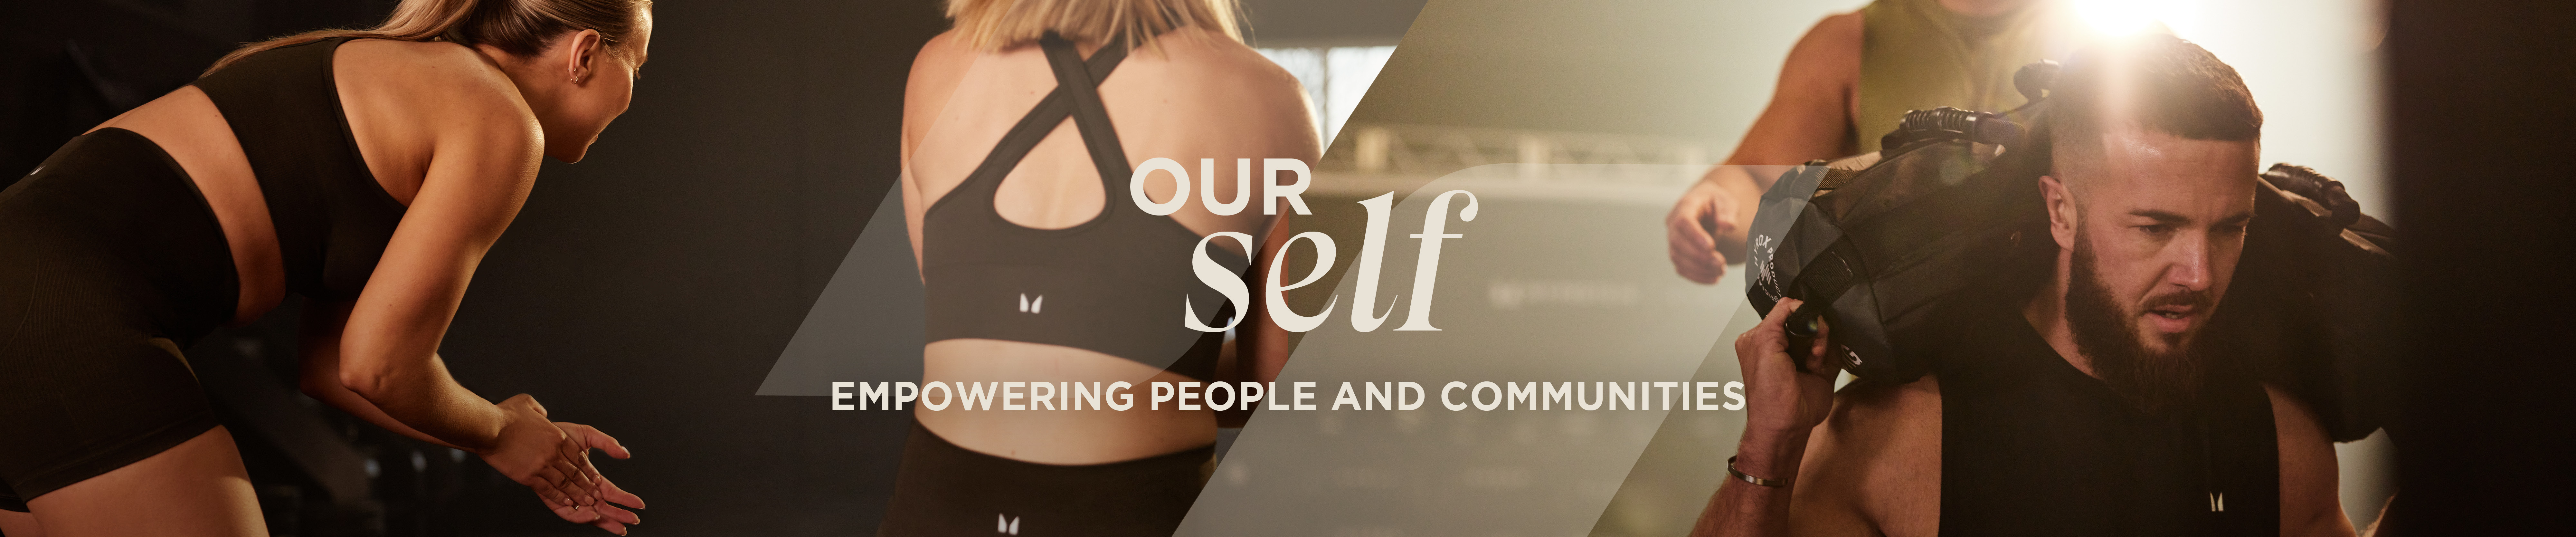 Our self, empowering people and communities